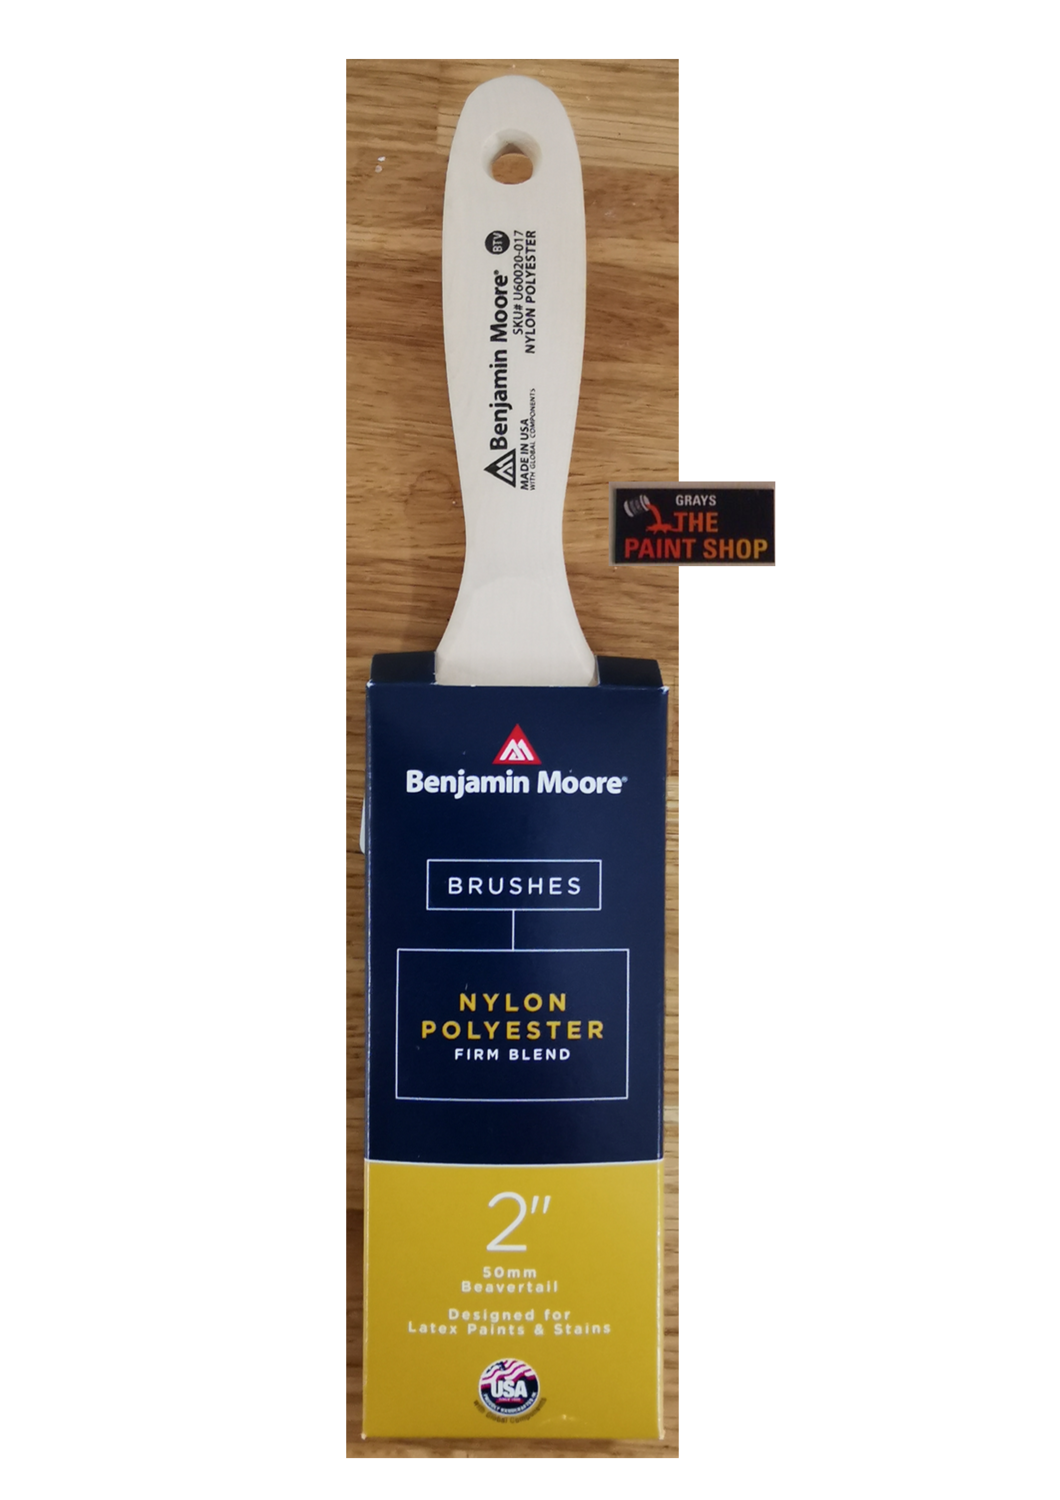 Benjamin Moore Nylon Polyester 600 Firm Blend Range Brush 2", 2.5" & 3" (click here to select size) Prices From